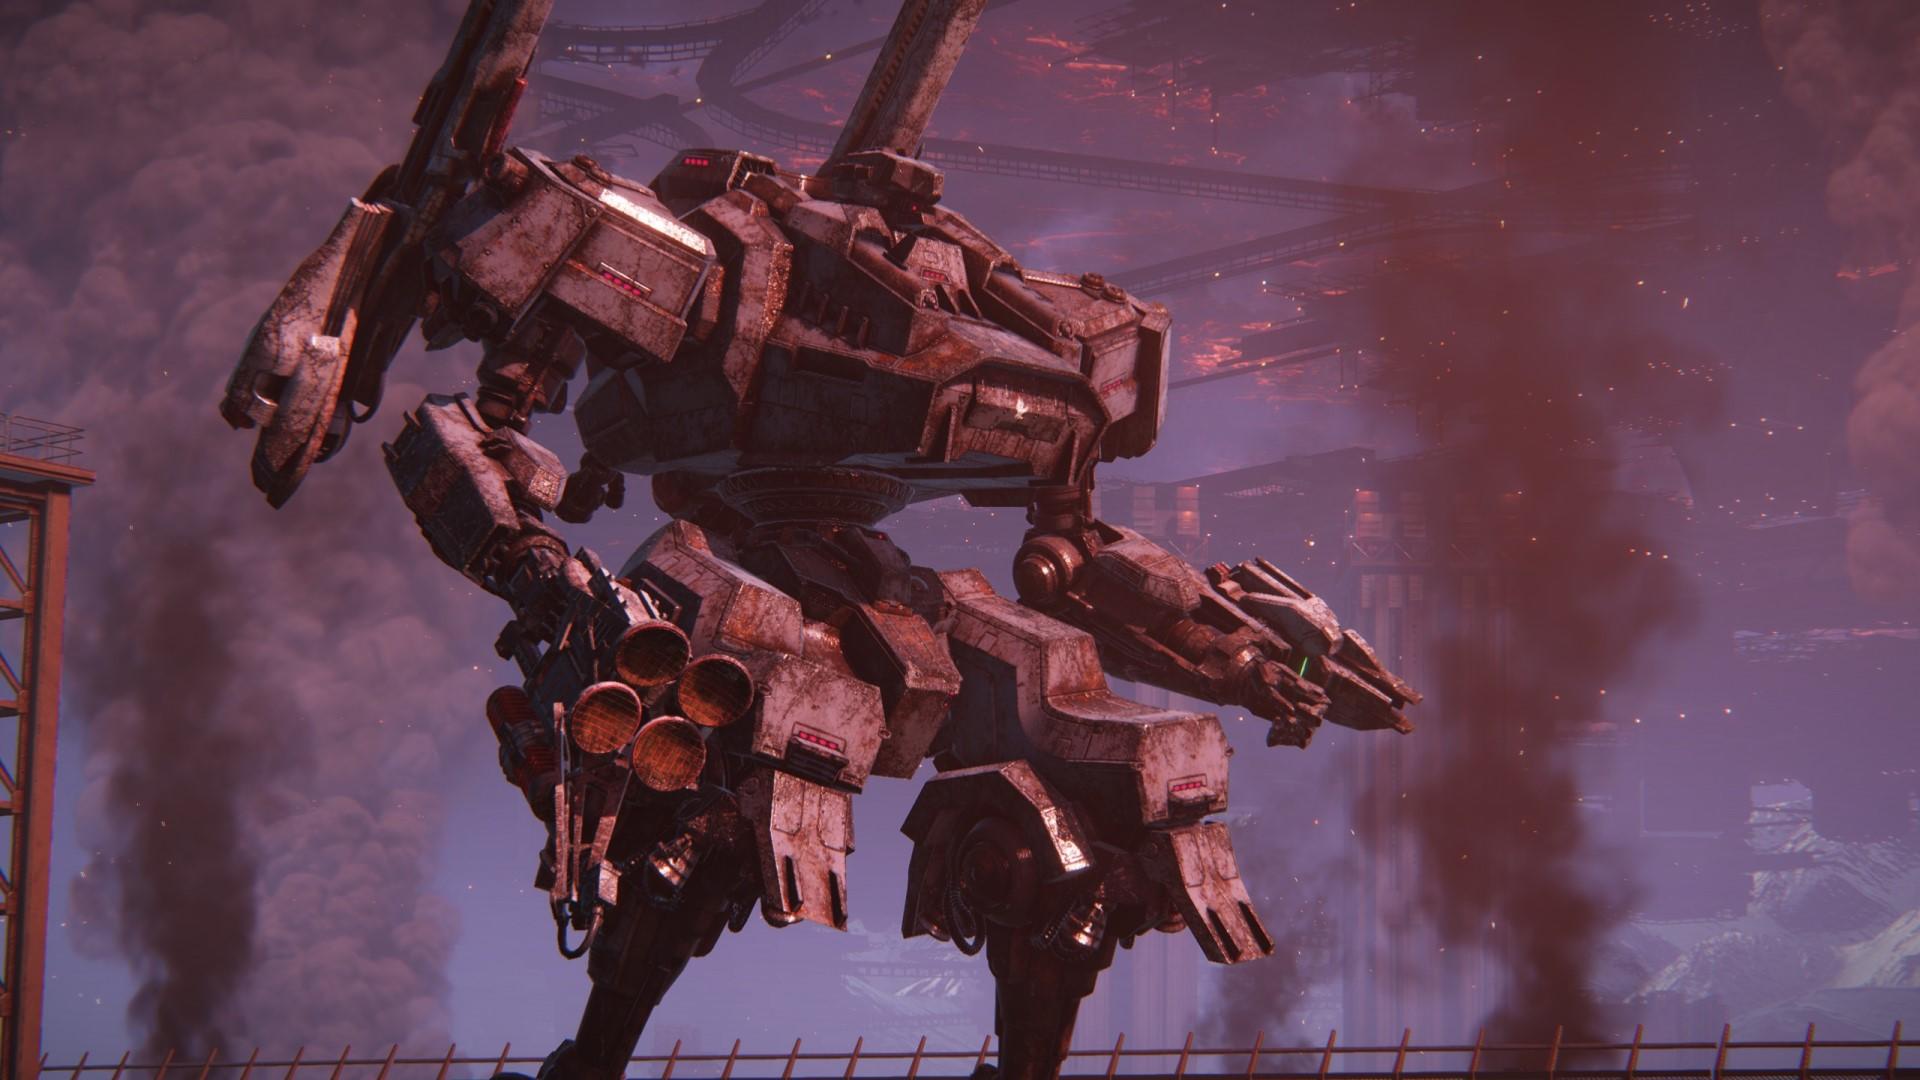 Armored Core VI Fires of Rubicon' first look: Fast battles with  customizable mechs